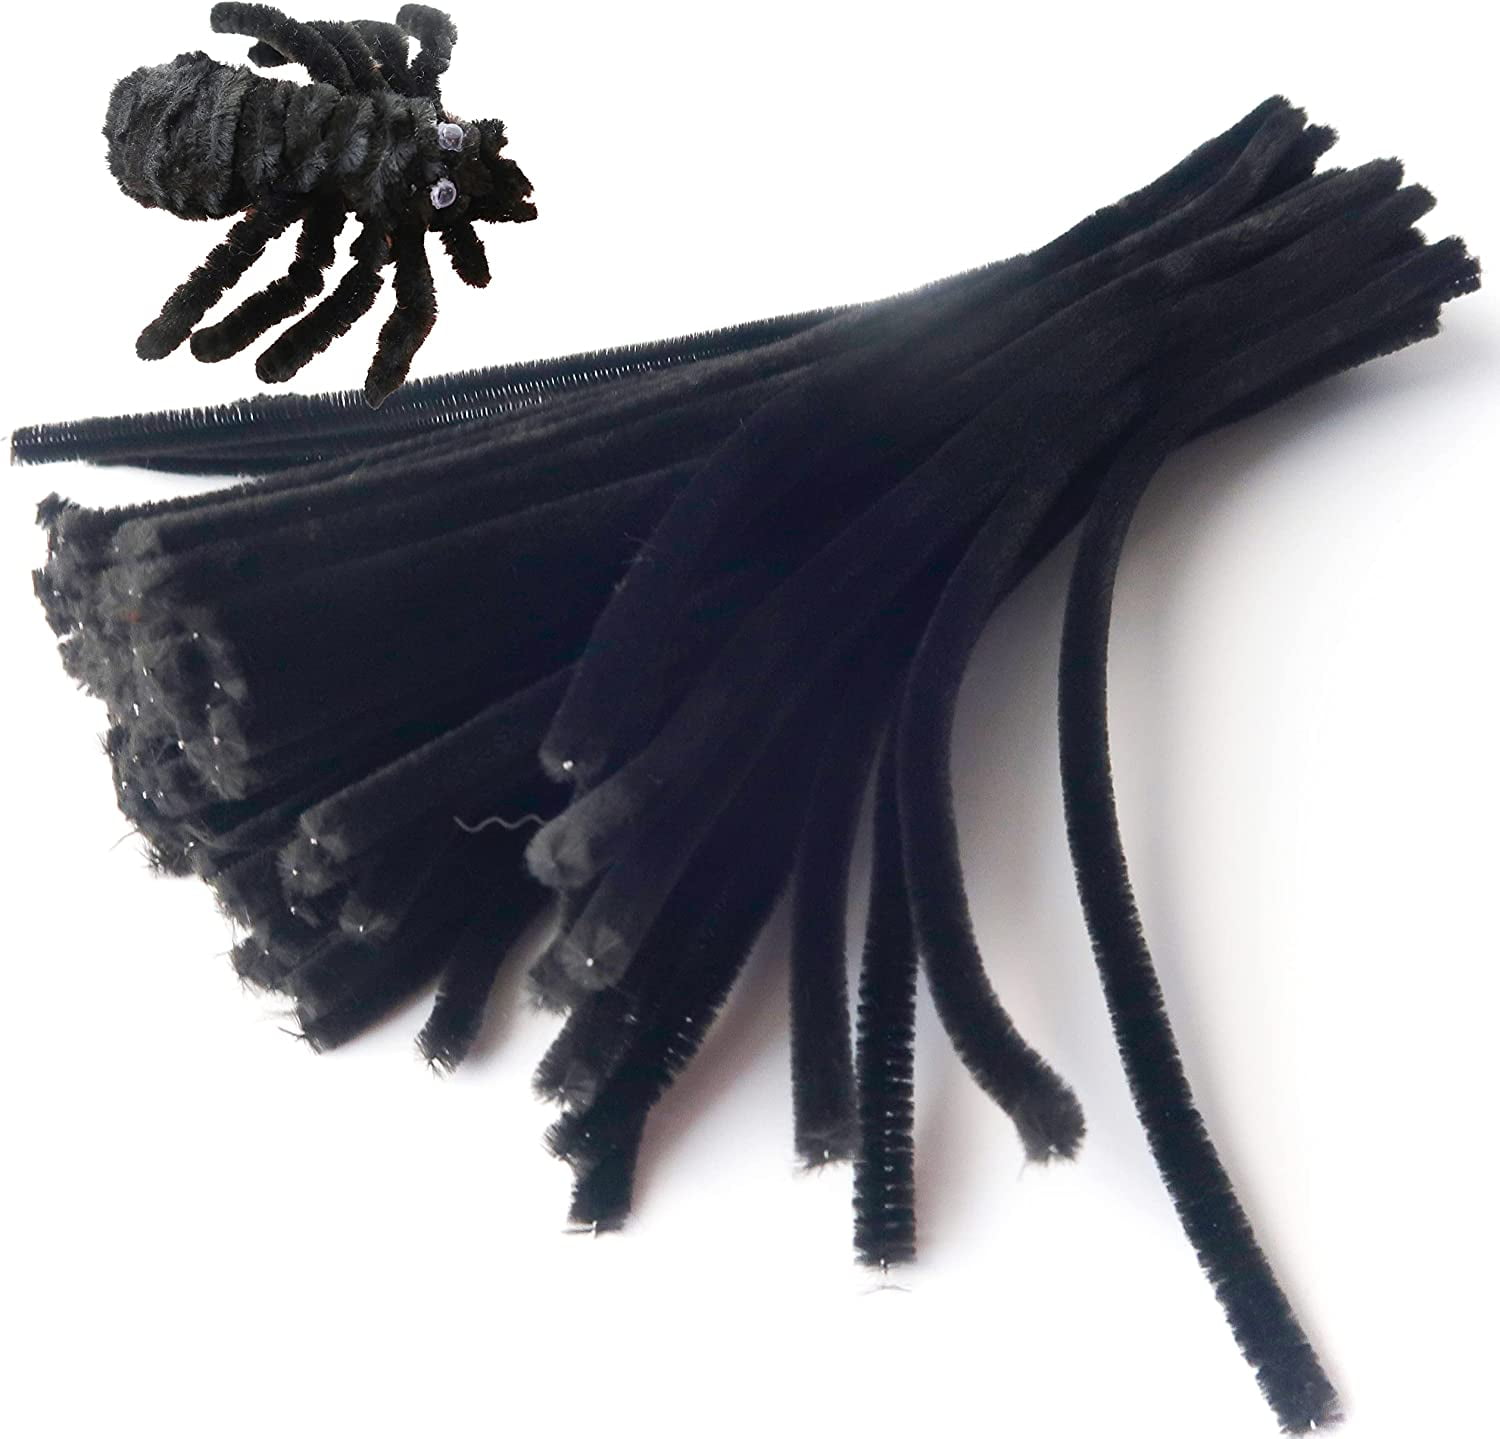 TOAOB 120pcs Black Pipe Cleaners Bump Pipe Cleaners Chenille Stems Craft  Supplies Bending Plush 13mm x 12 inch for Handmade DIY Art Craft